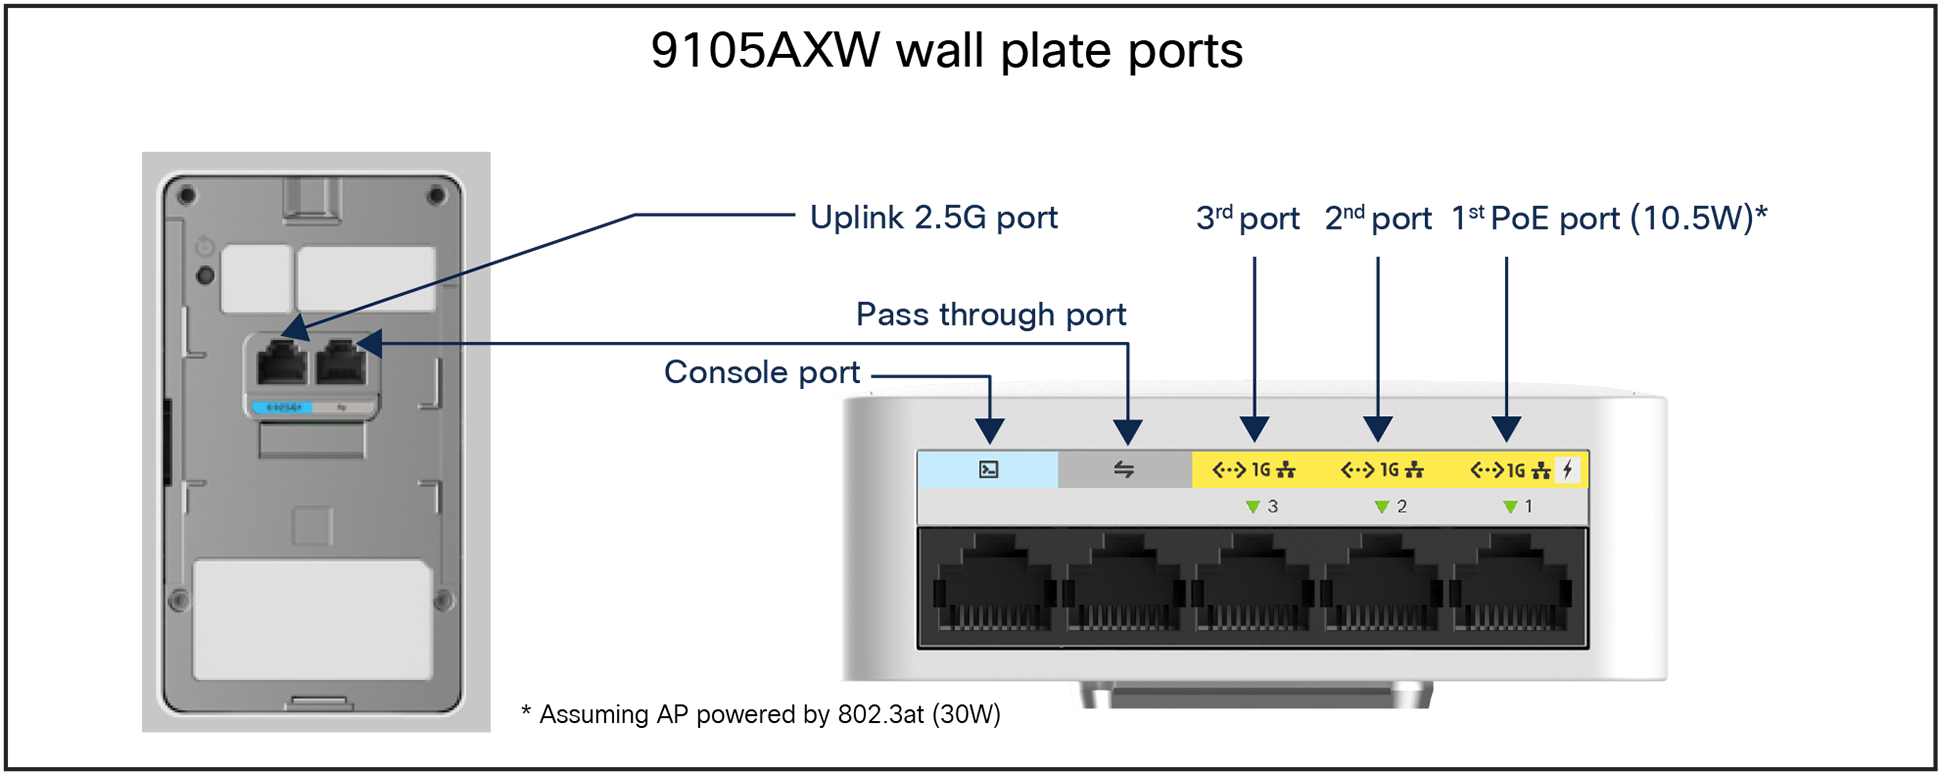 A computer router with many portsDescription automatically generated